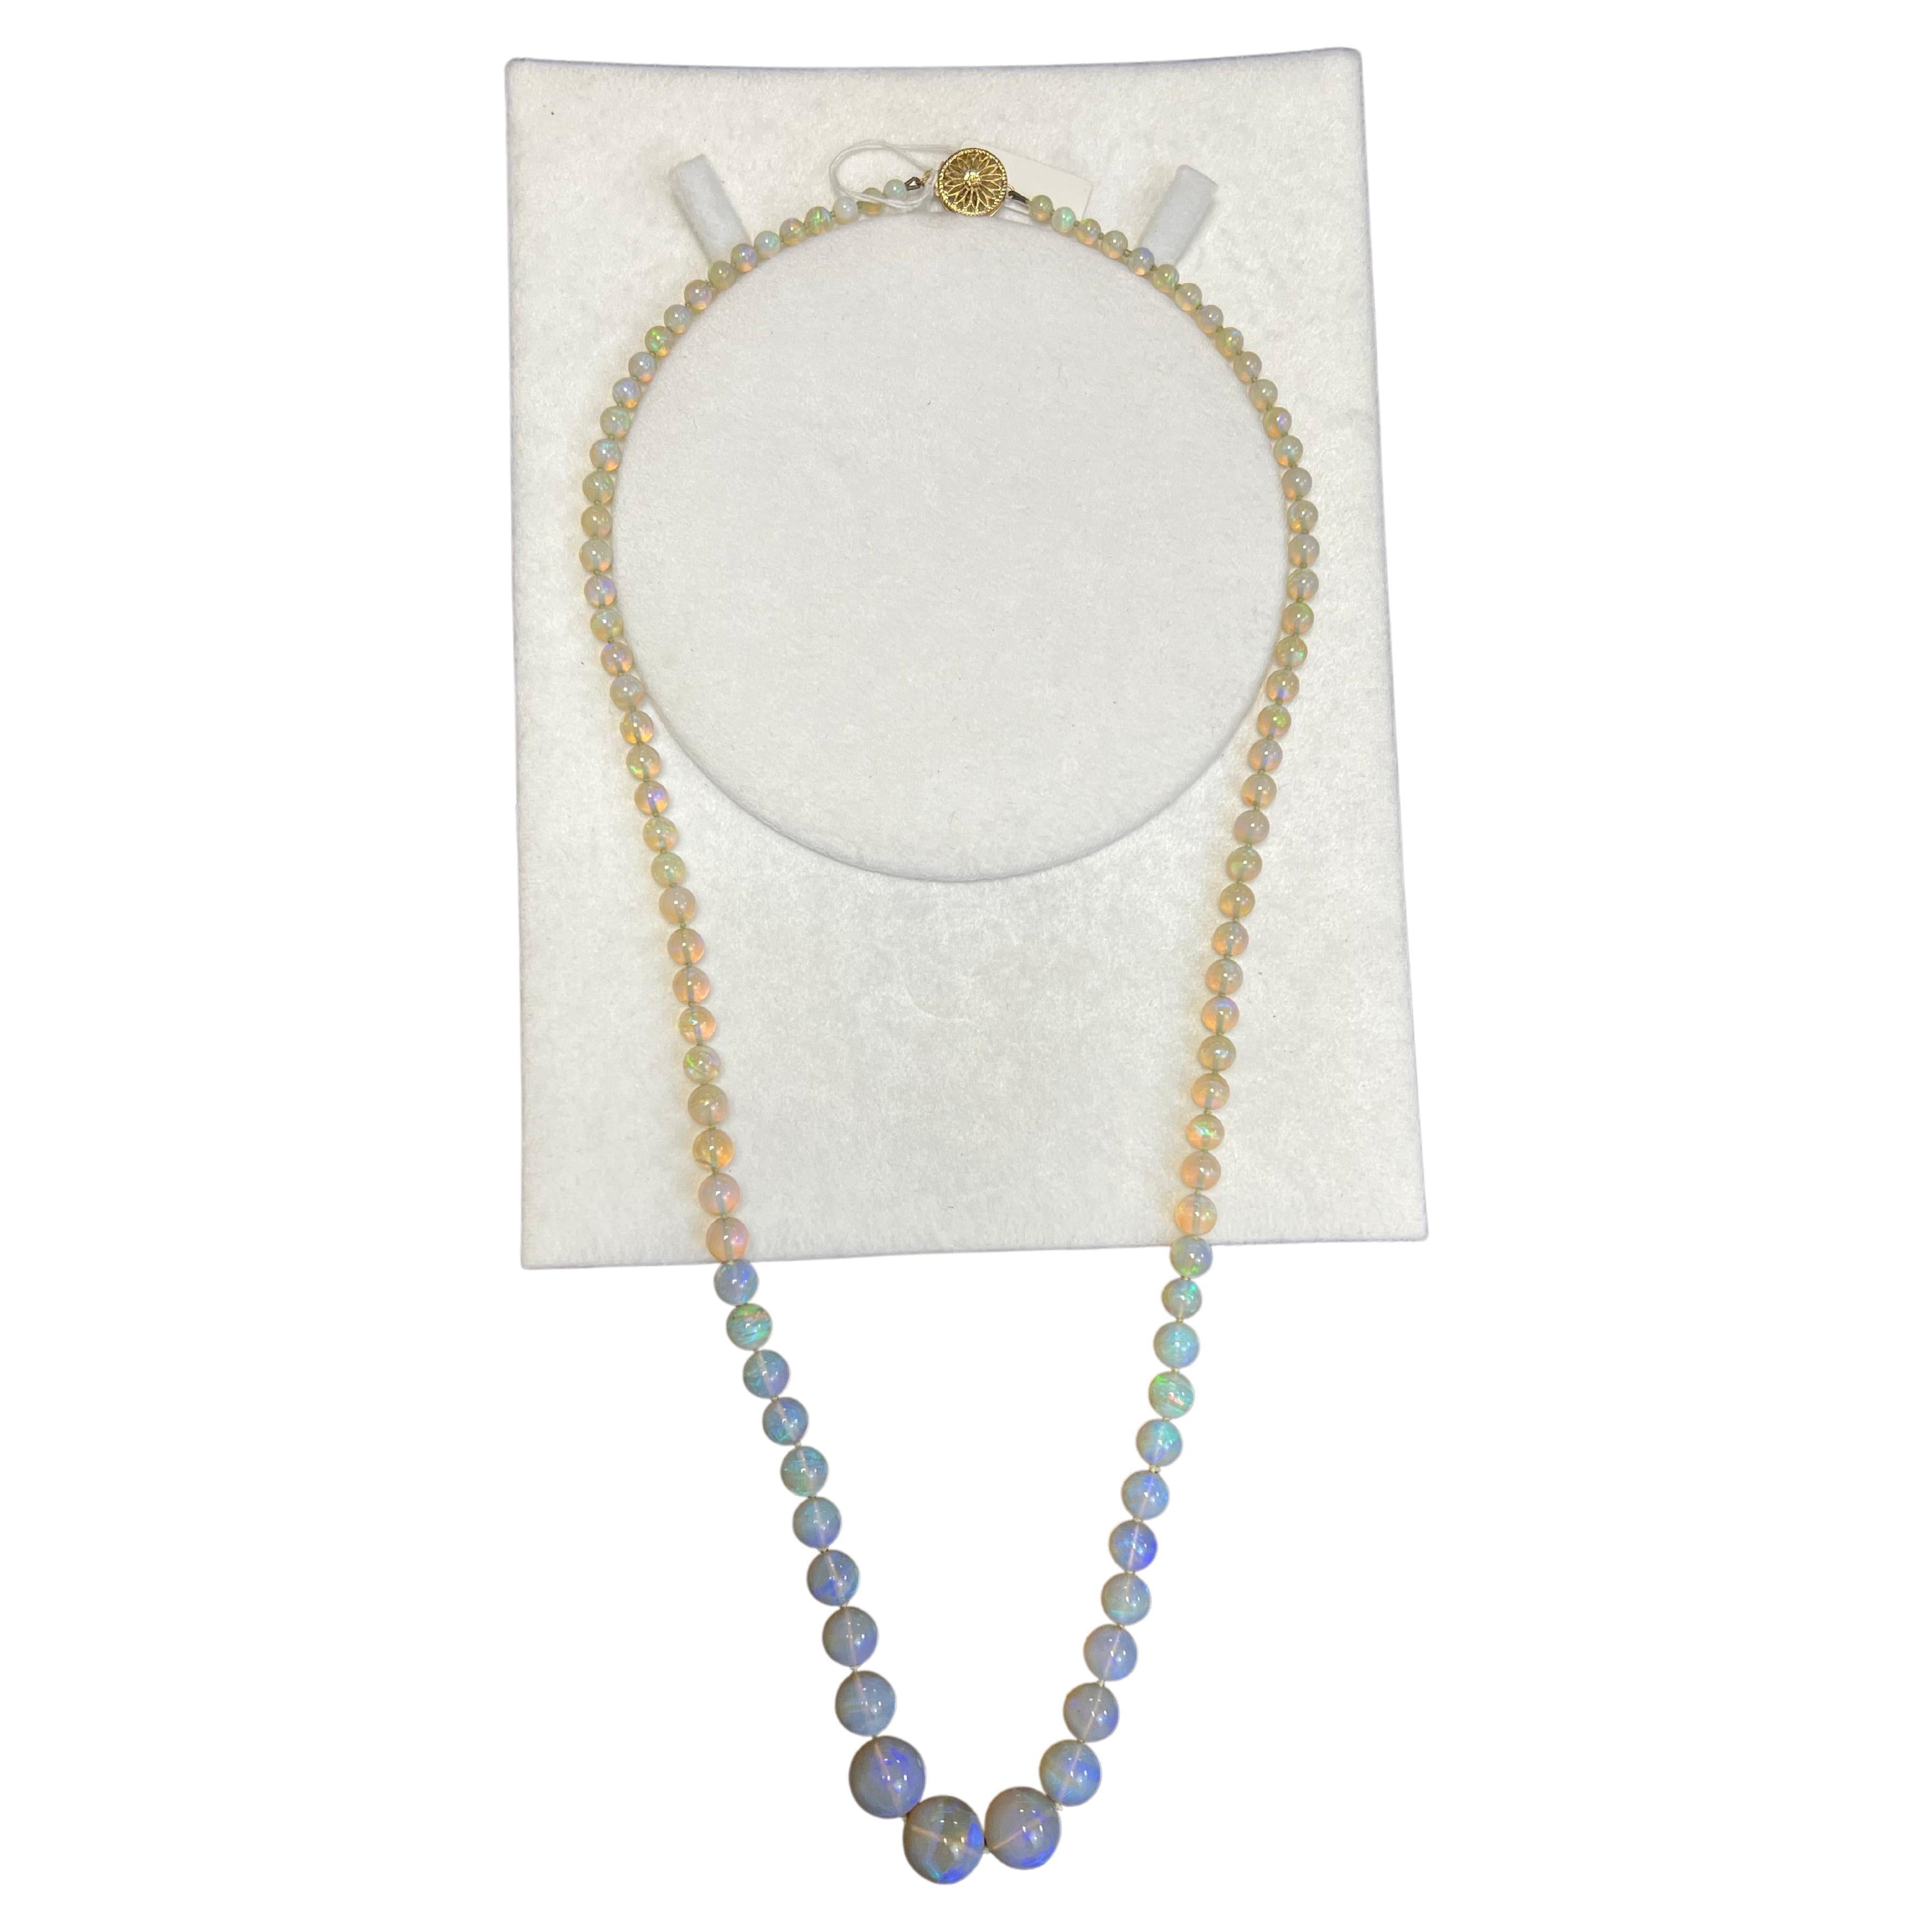 Lady's Crystal Opal Graduated Beads Necklace with 14K Yellow Gold  For Sale